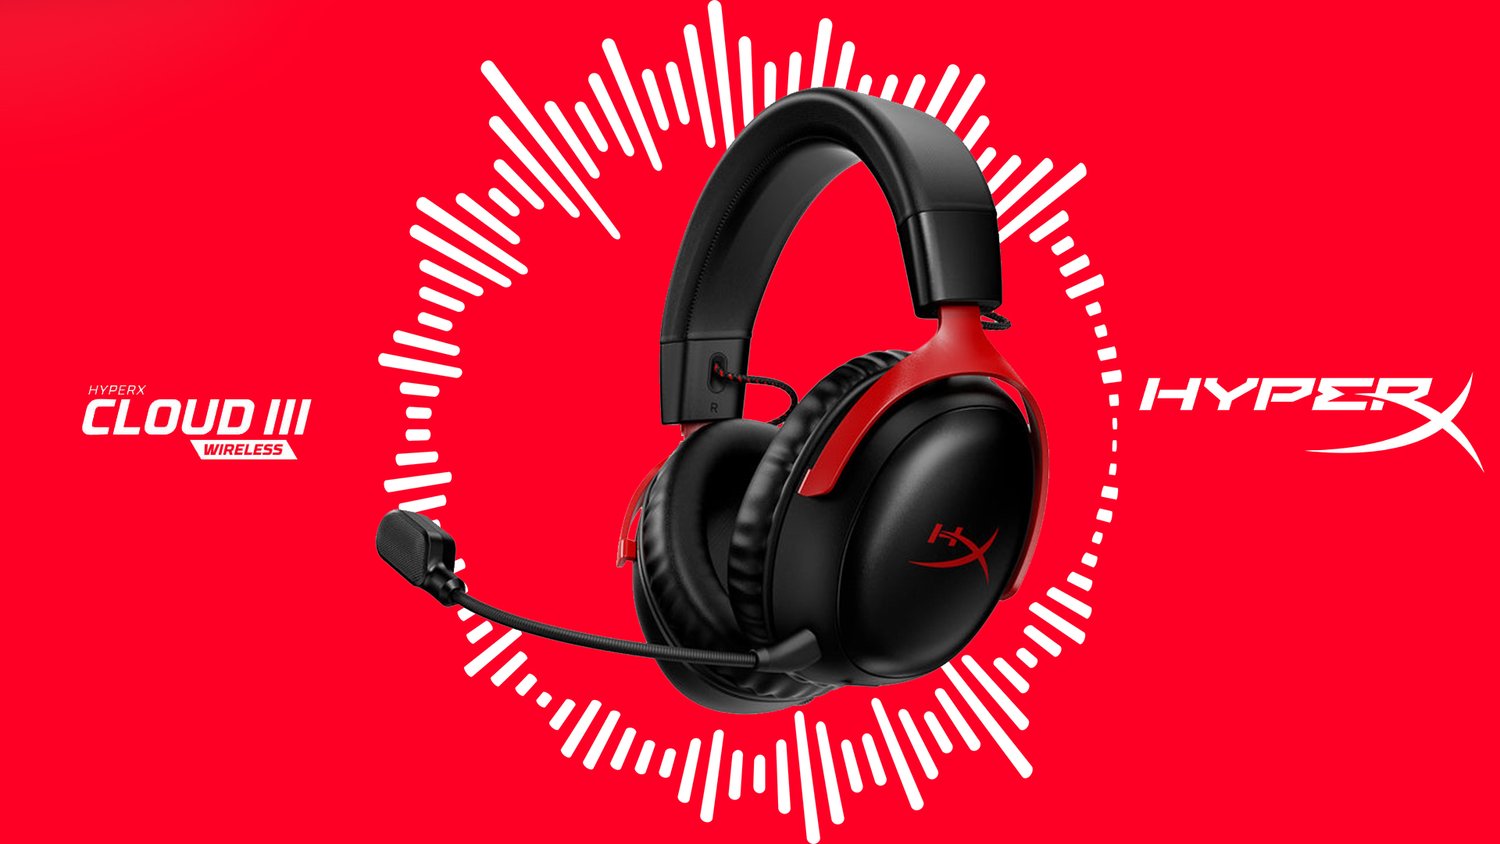 HyperX have announced the Cloud III Wireless and will launch it